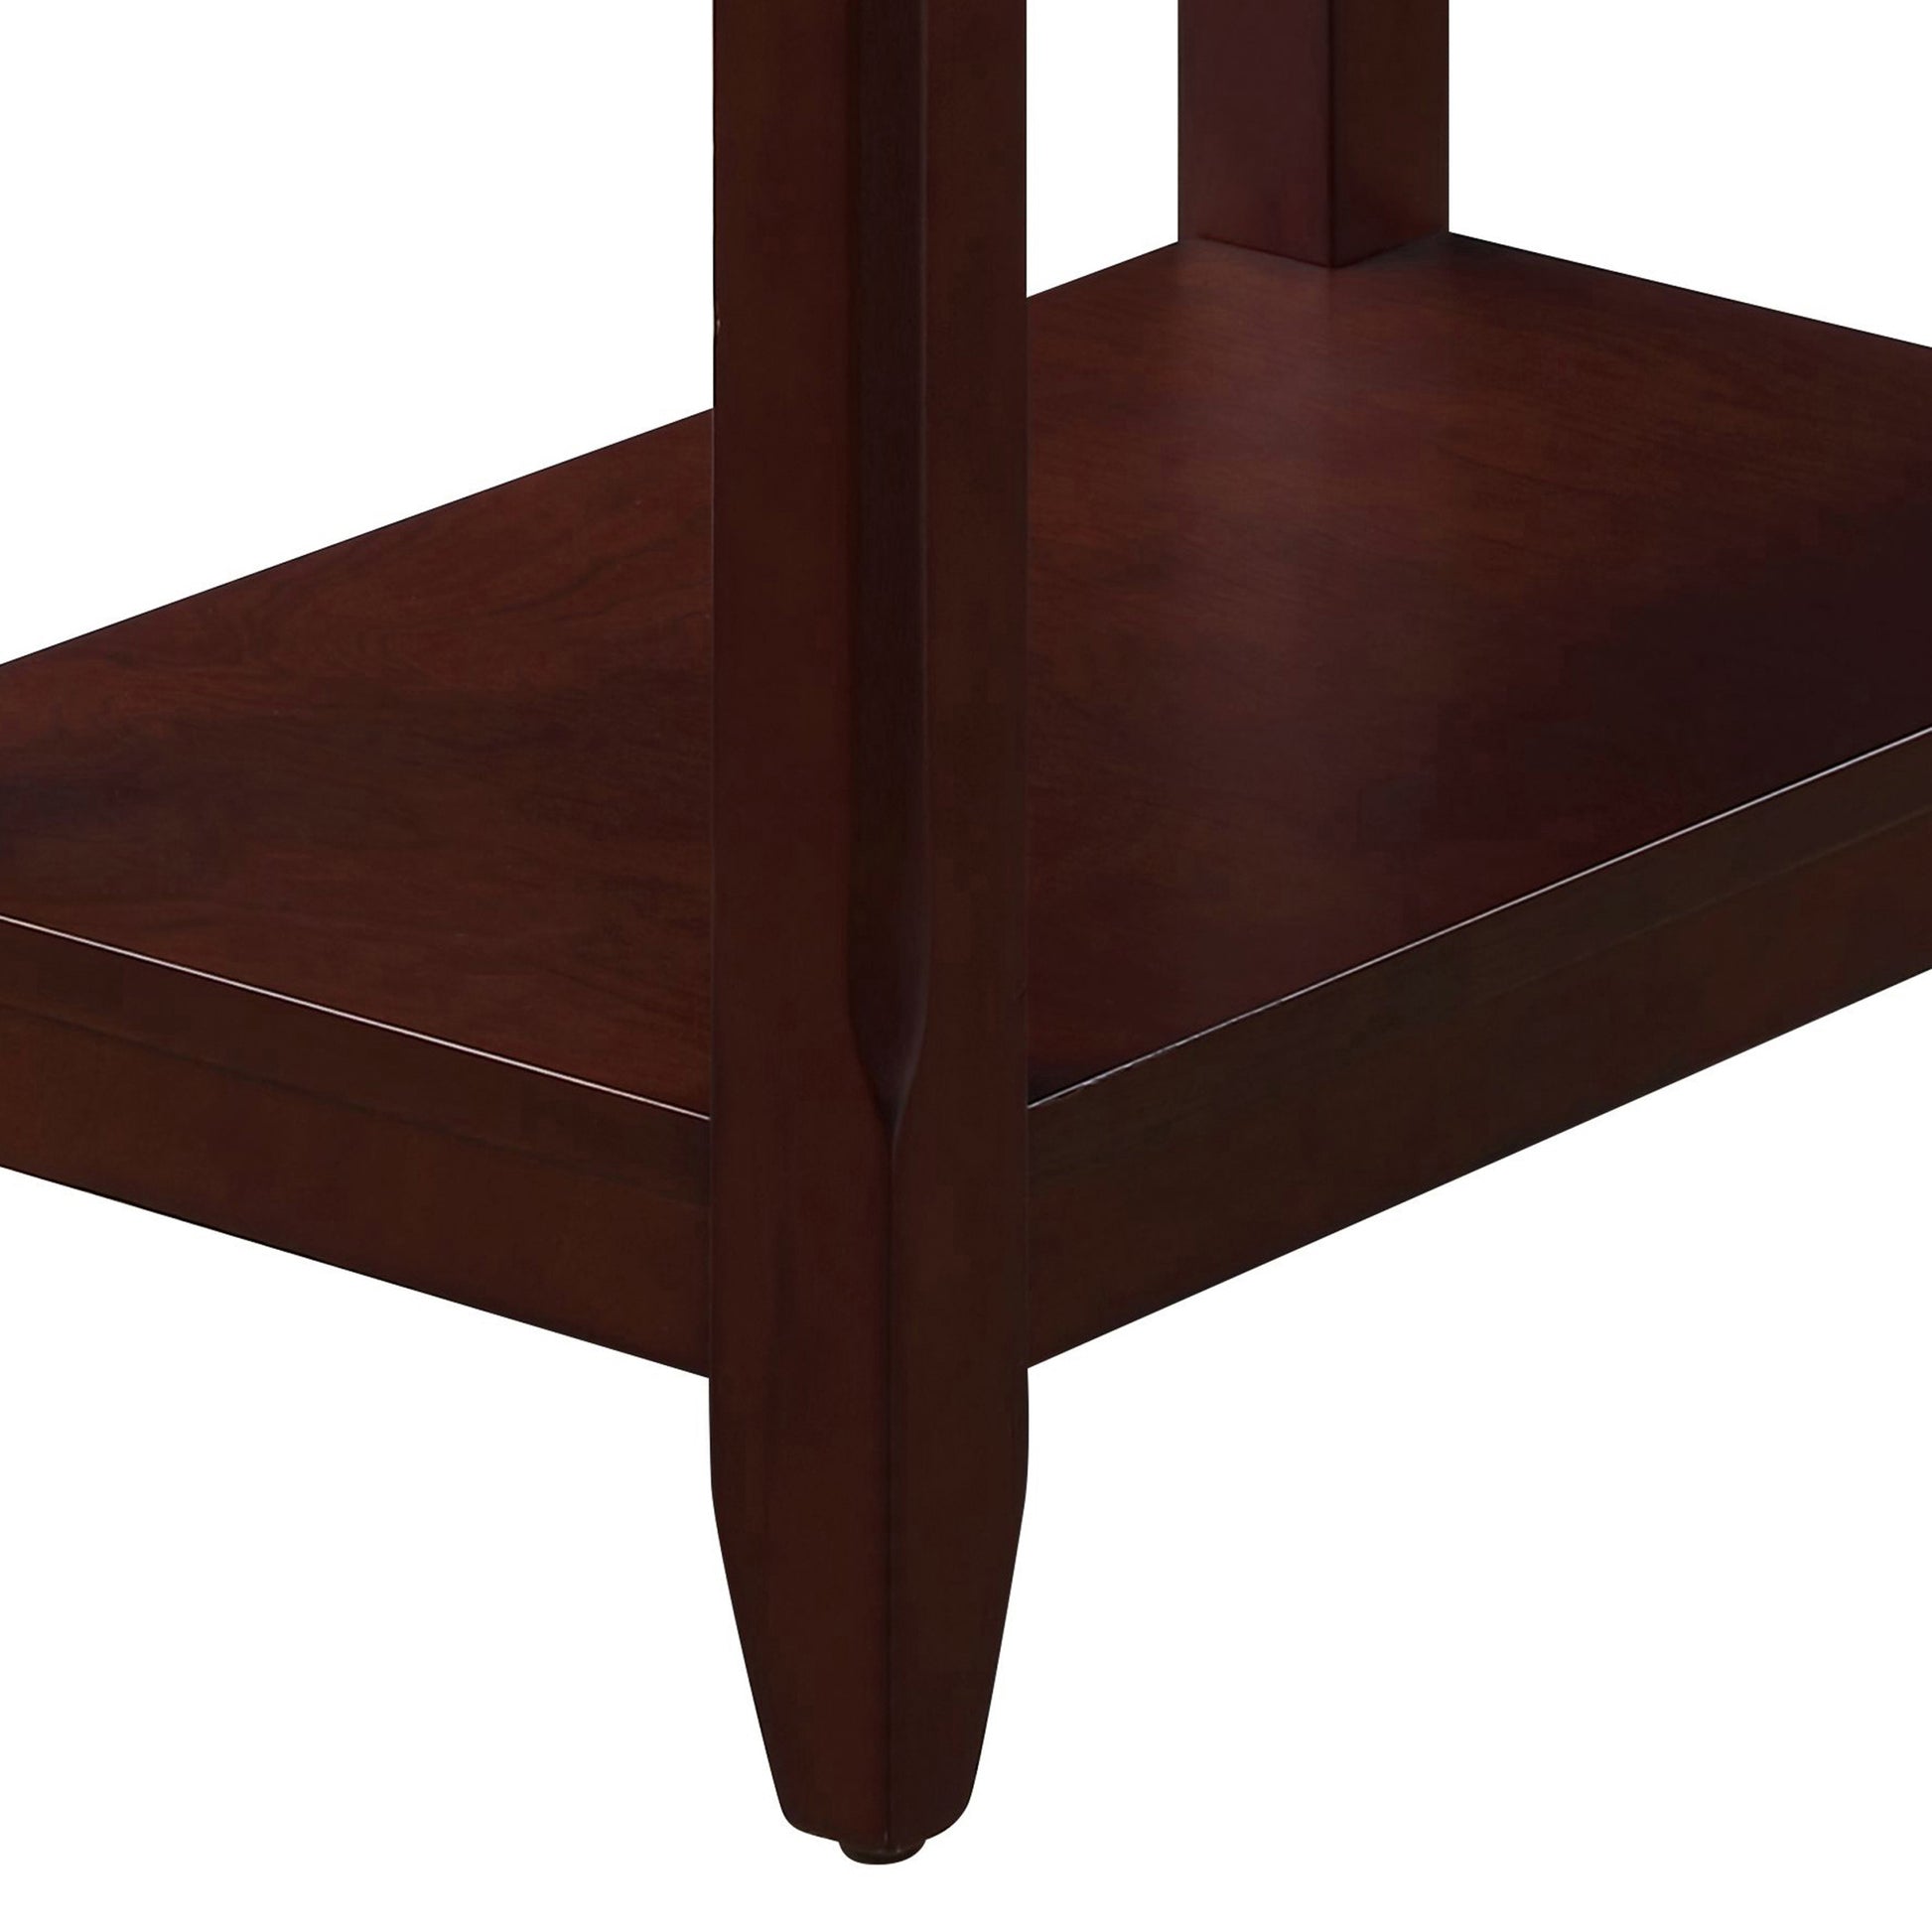 Espresso Accent Table With Bottom Shelf -